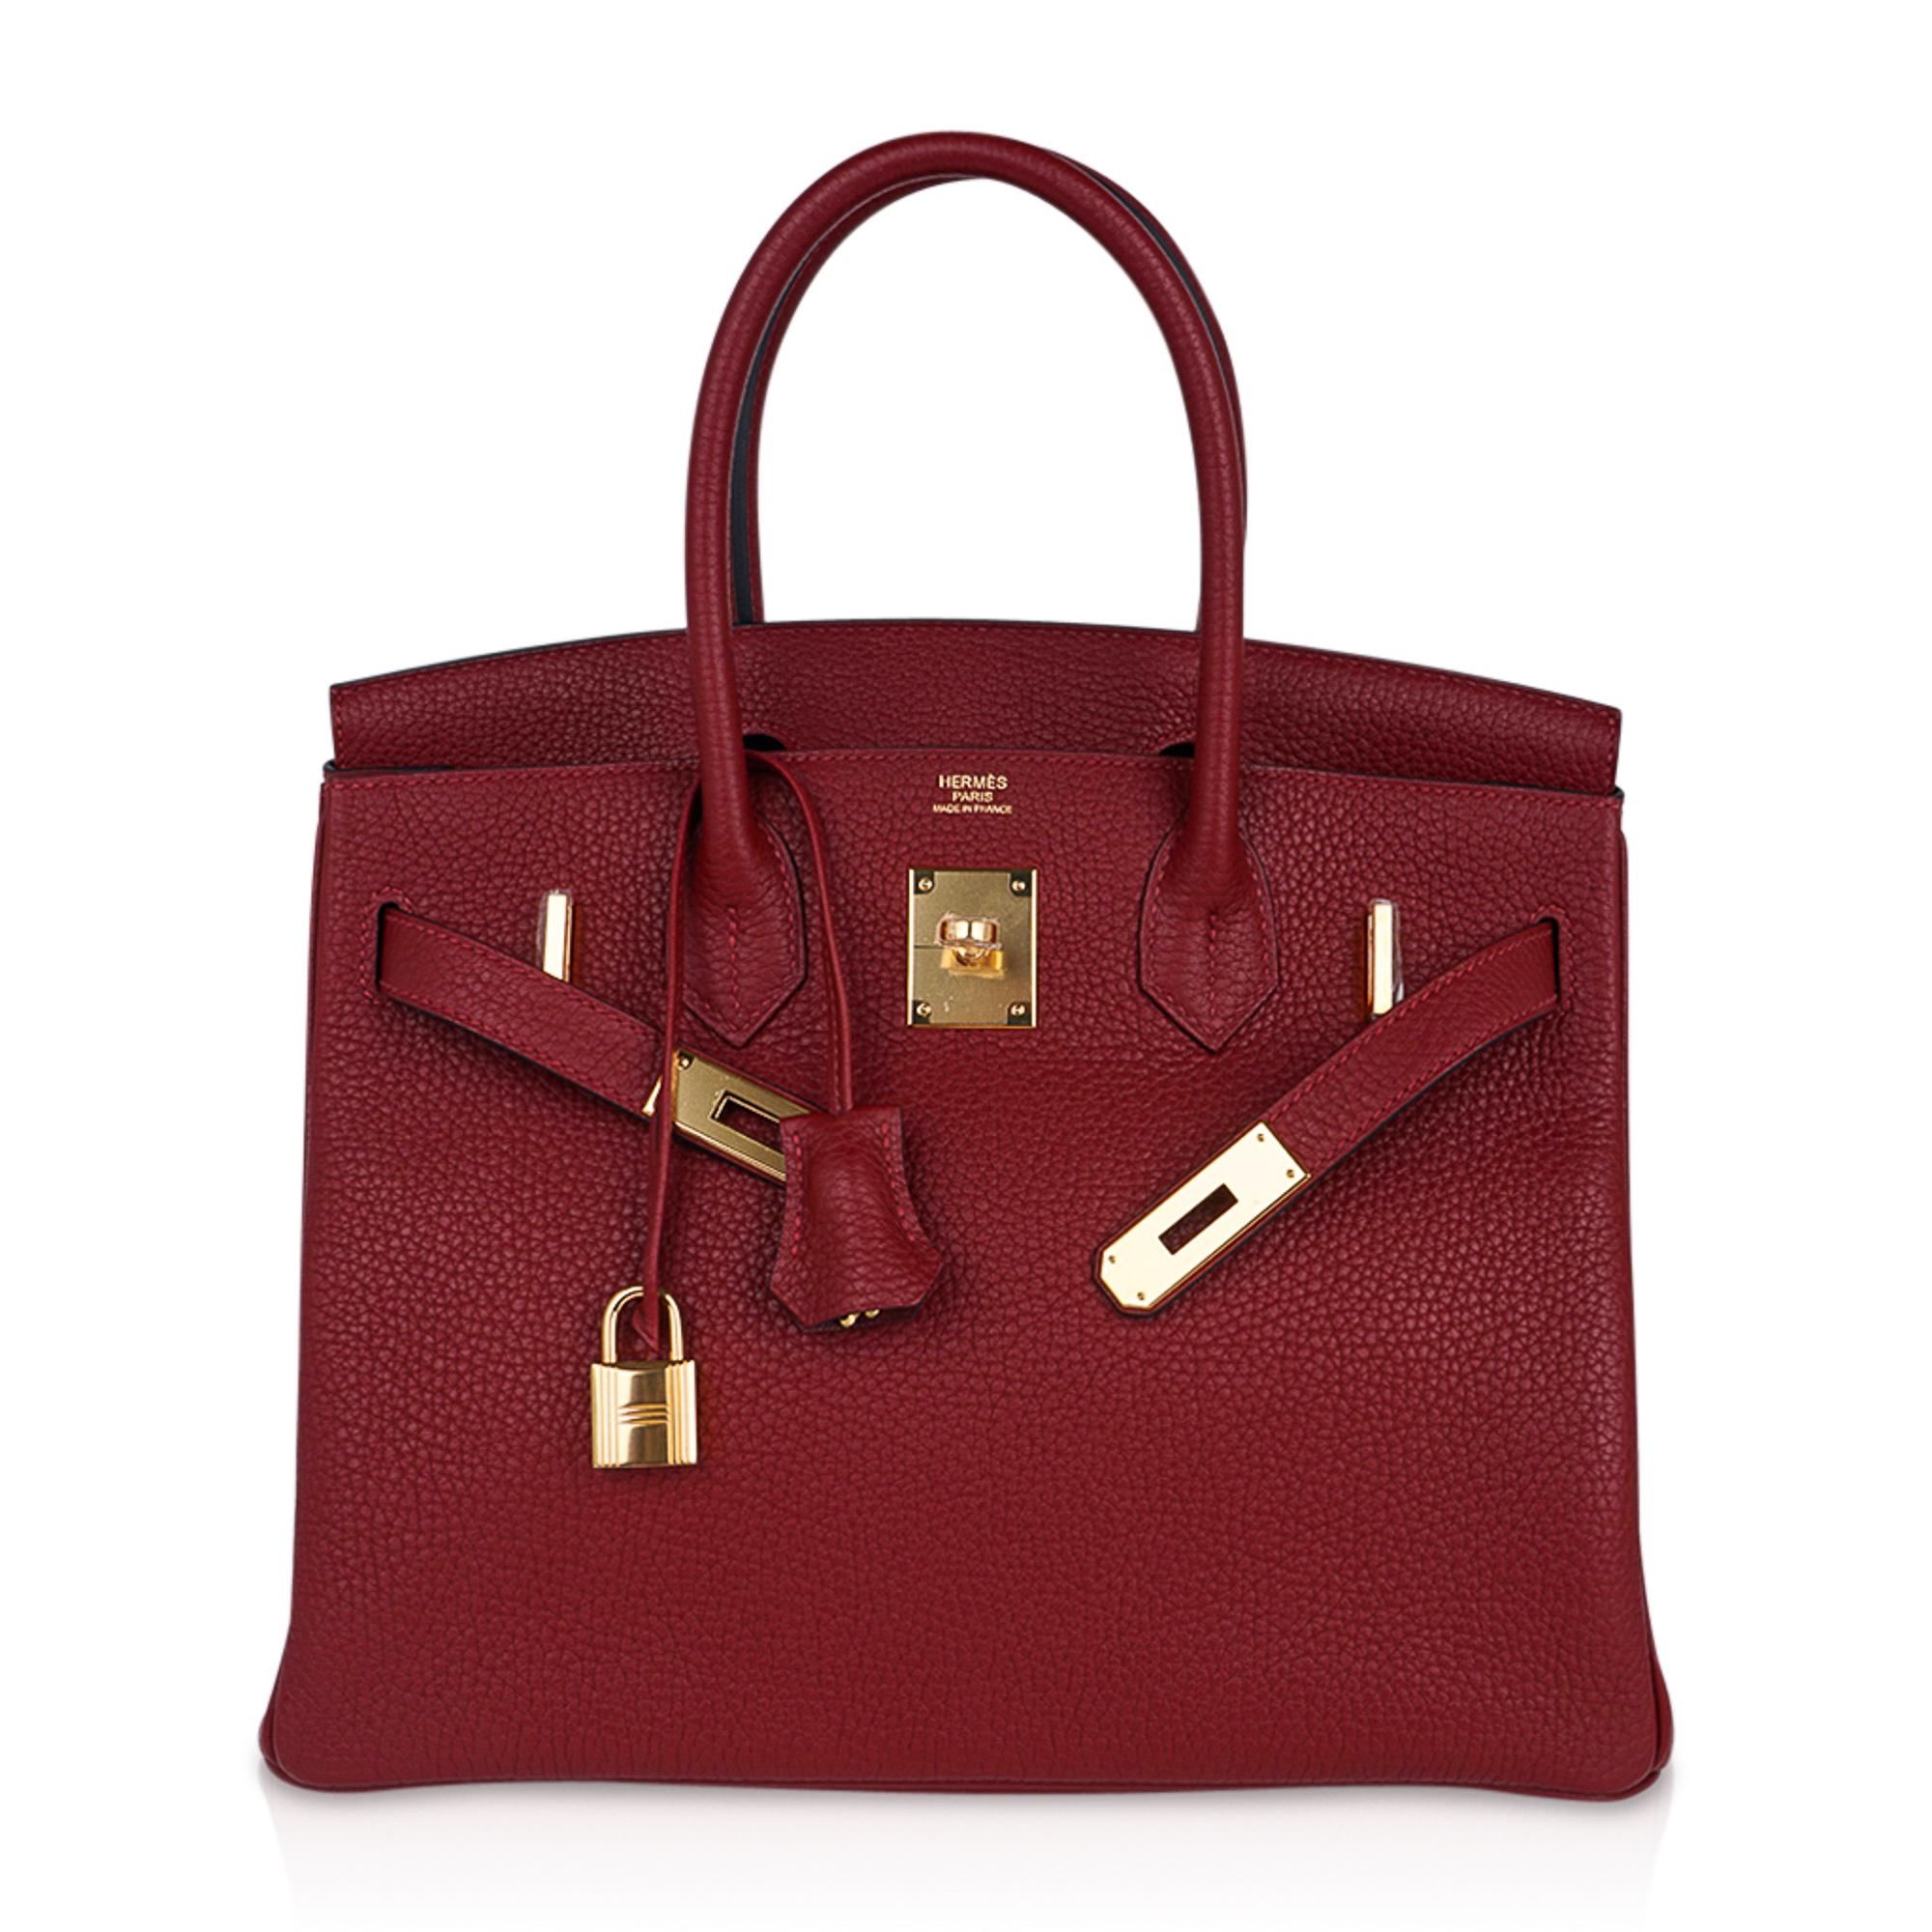 Hermes Birkin 30 Bag Rouge H Gold Hardware Clemence Leather New w/Box ...